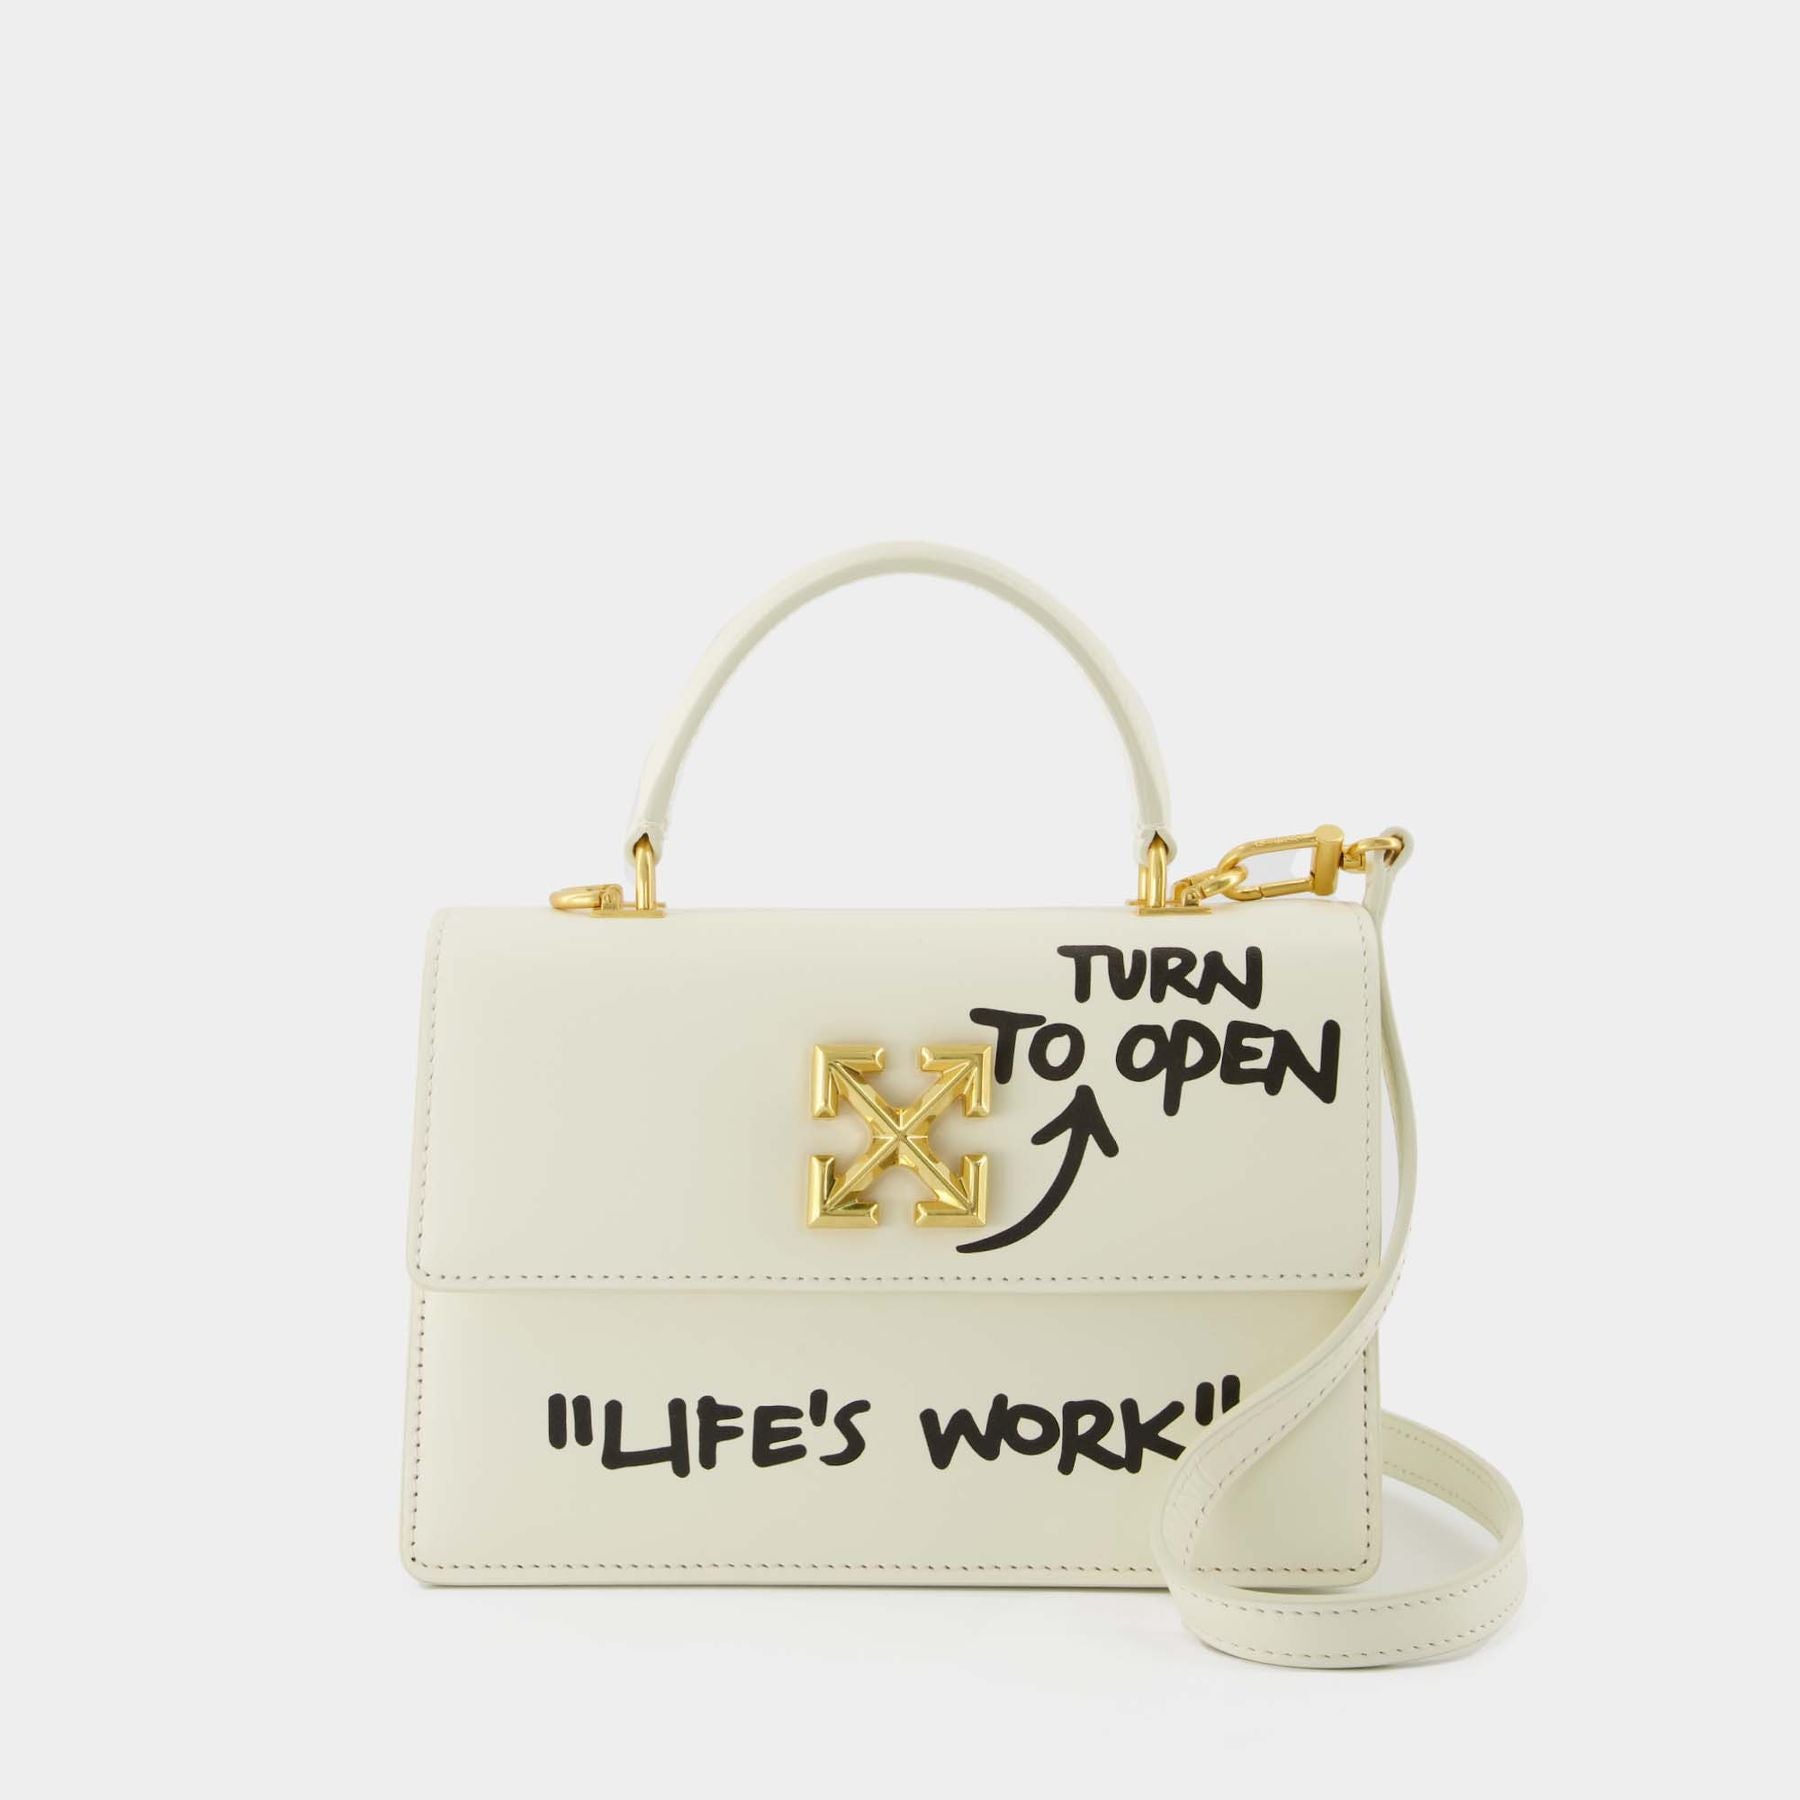 OFF-WHITE White Leather 1.4 Jitney Quote Bag SALARY INSIDE Top